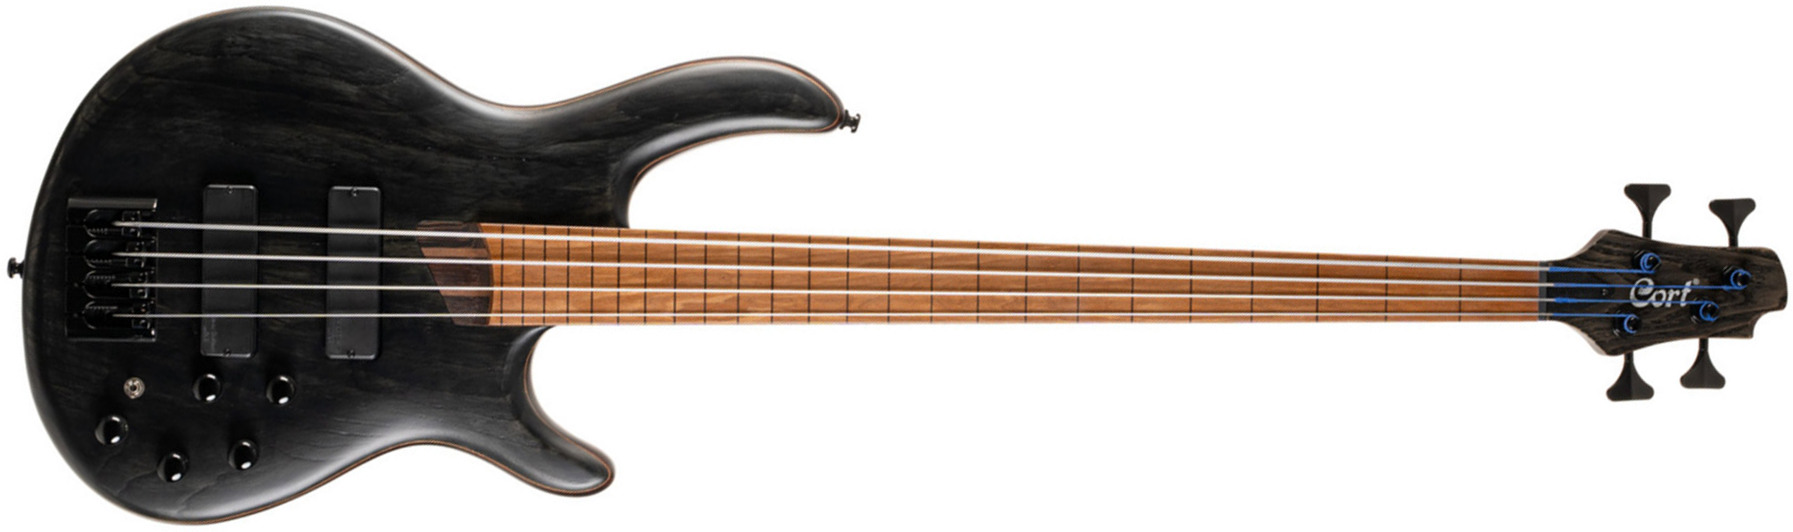 Cort B4 Element Active Bartolini Fretless Mn - Black - Solid body electric bass - Main picture